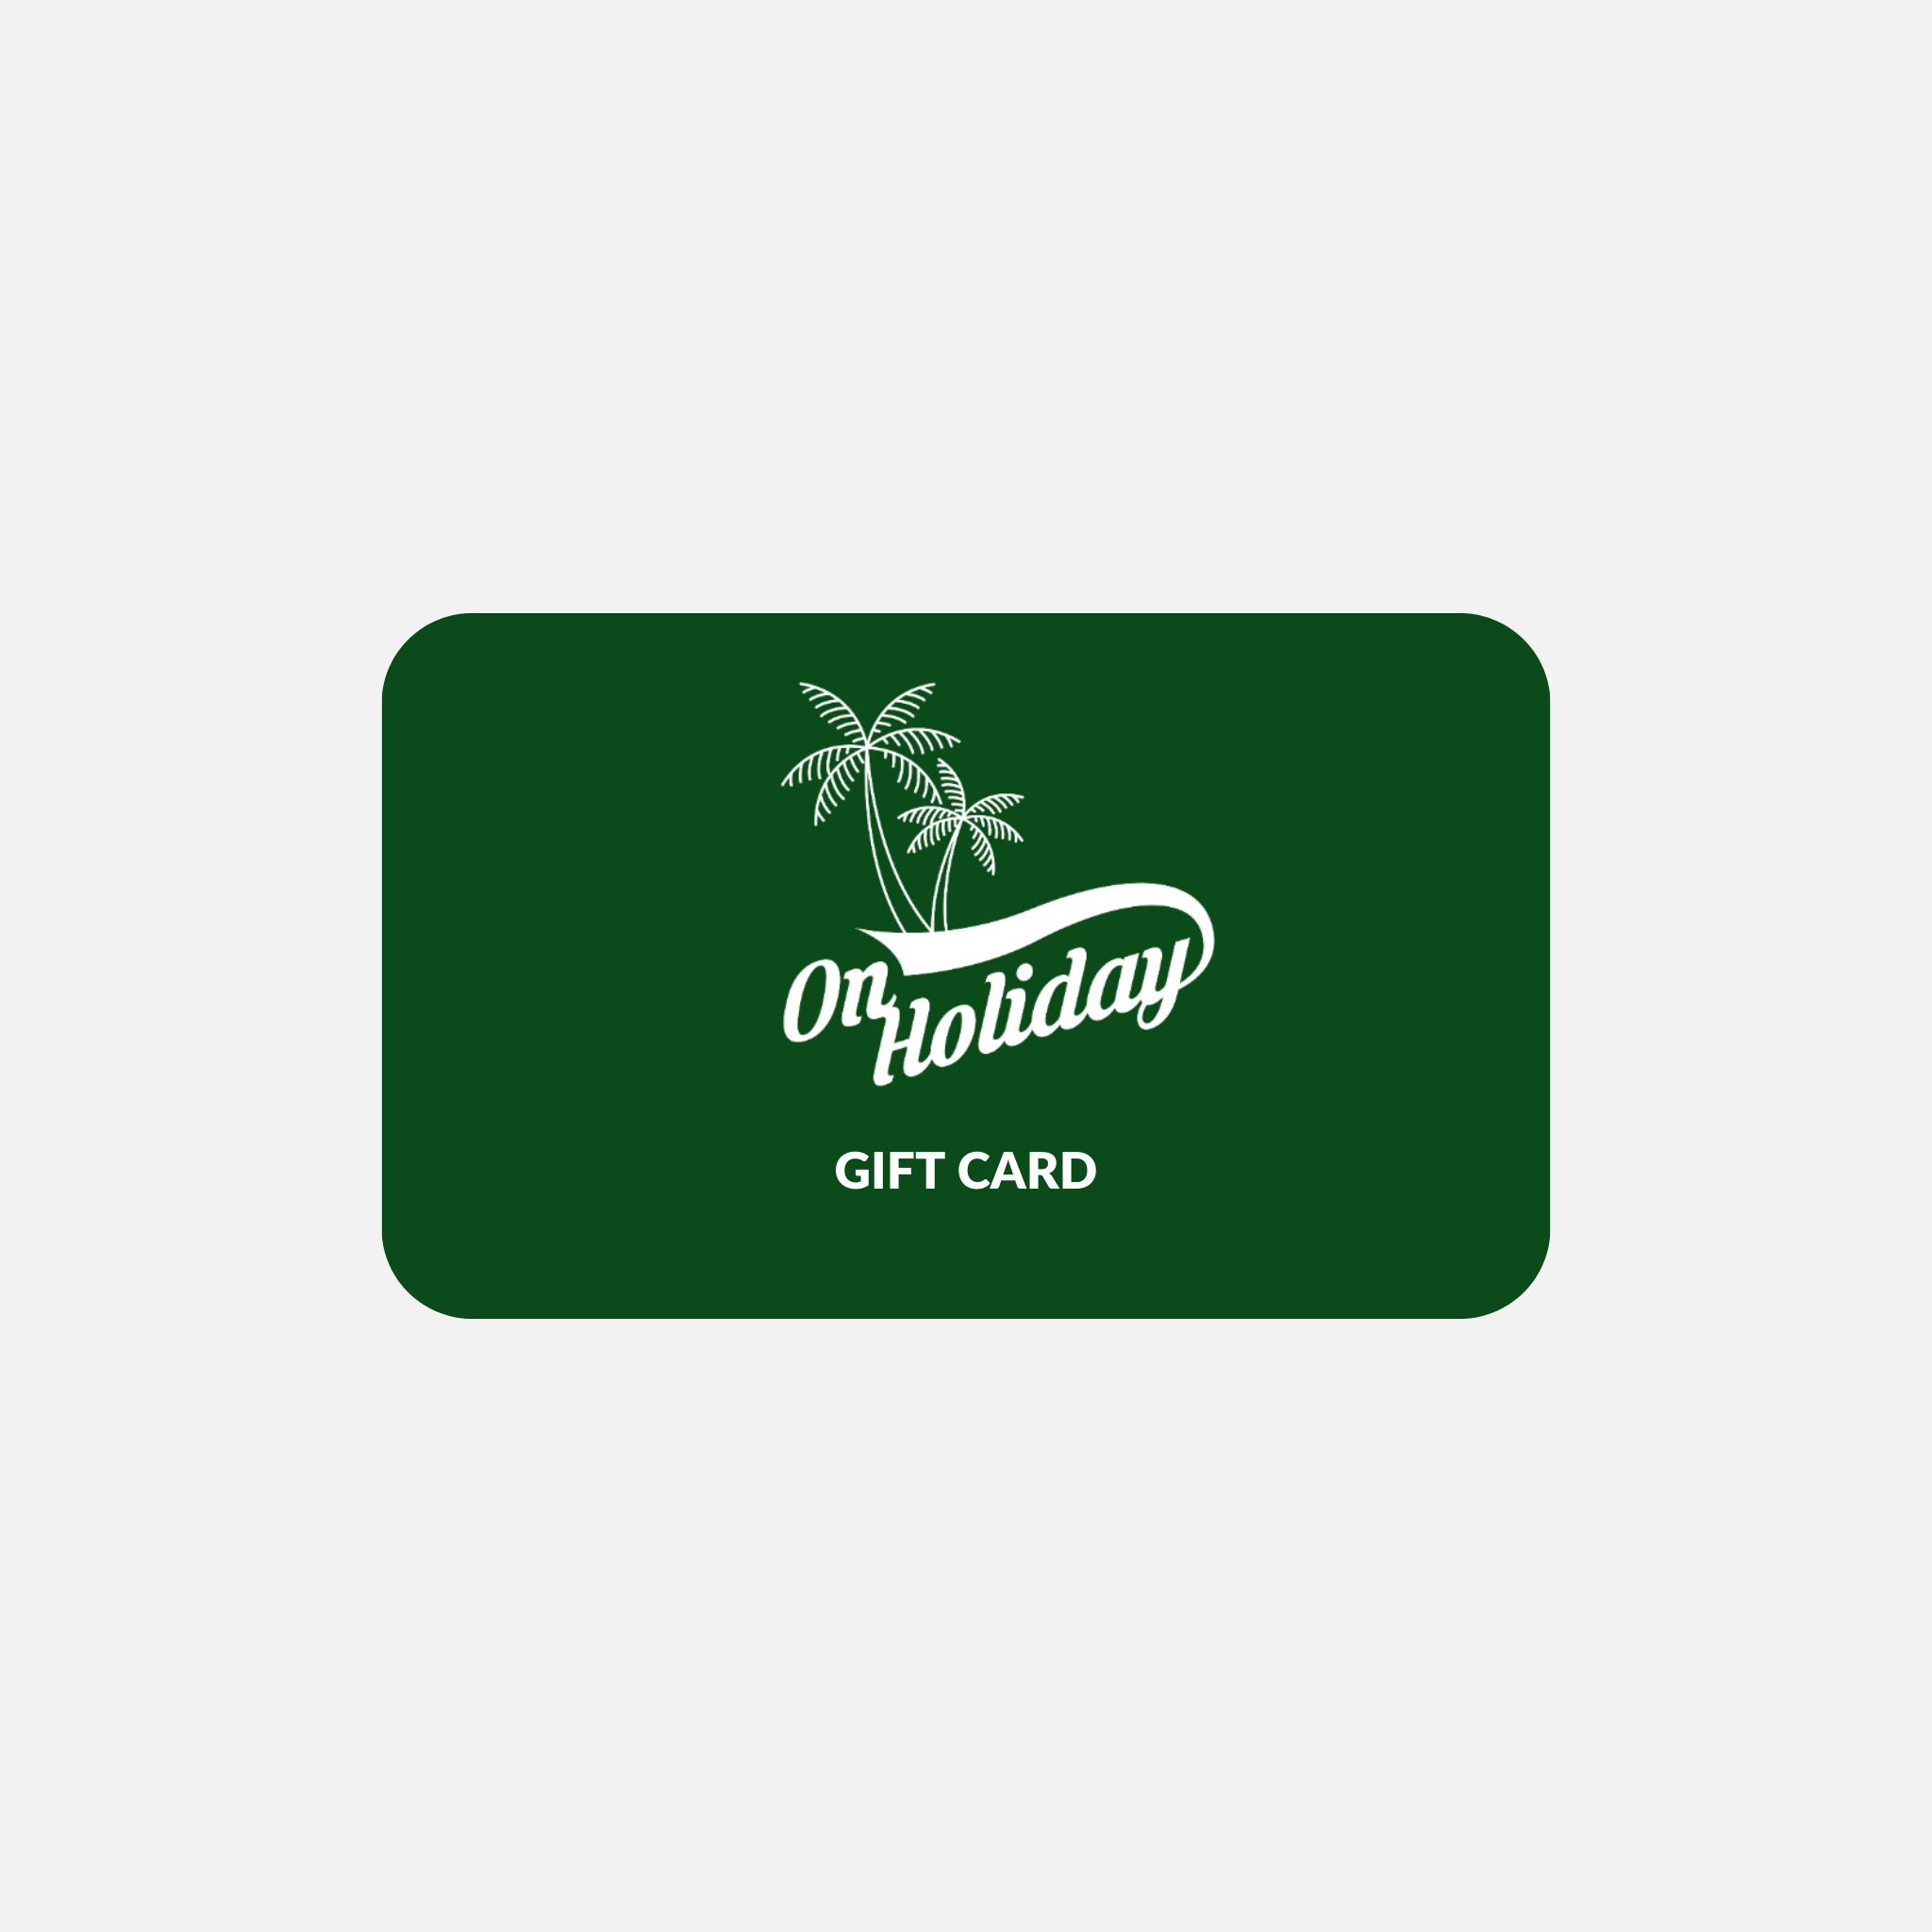 On Holiday Gift Card